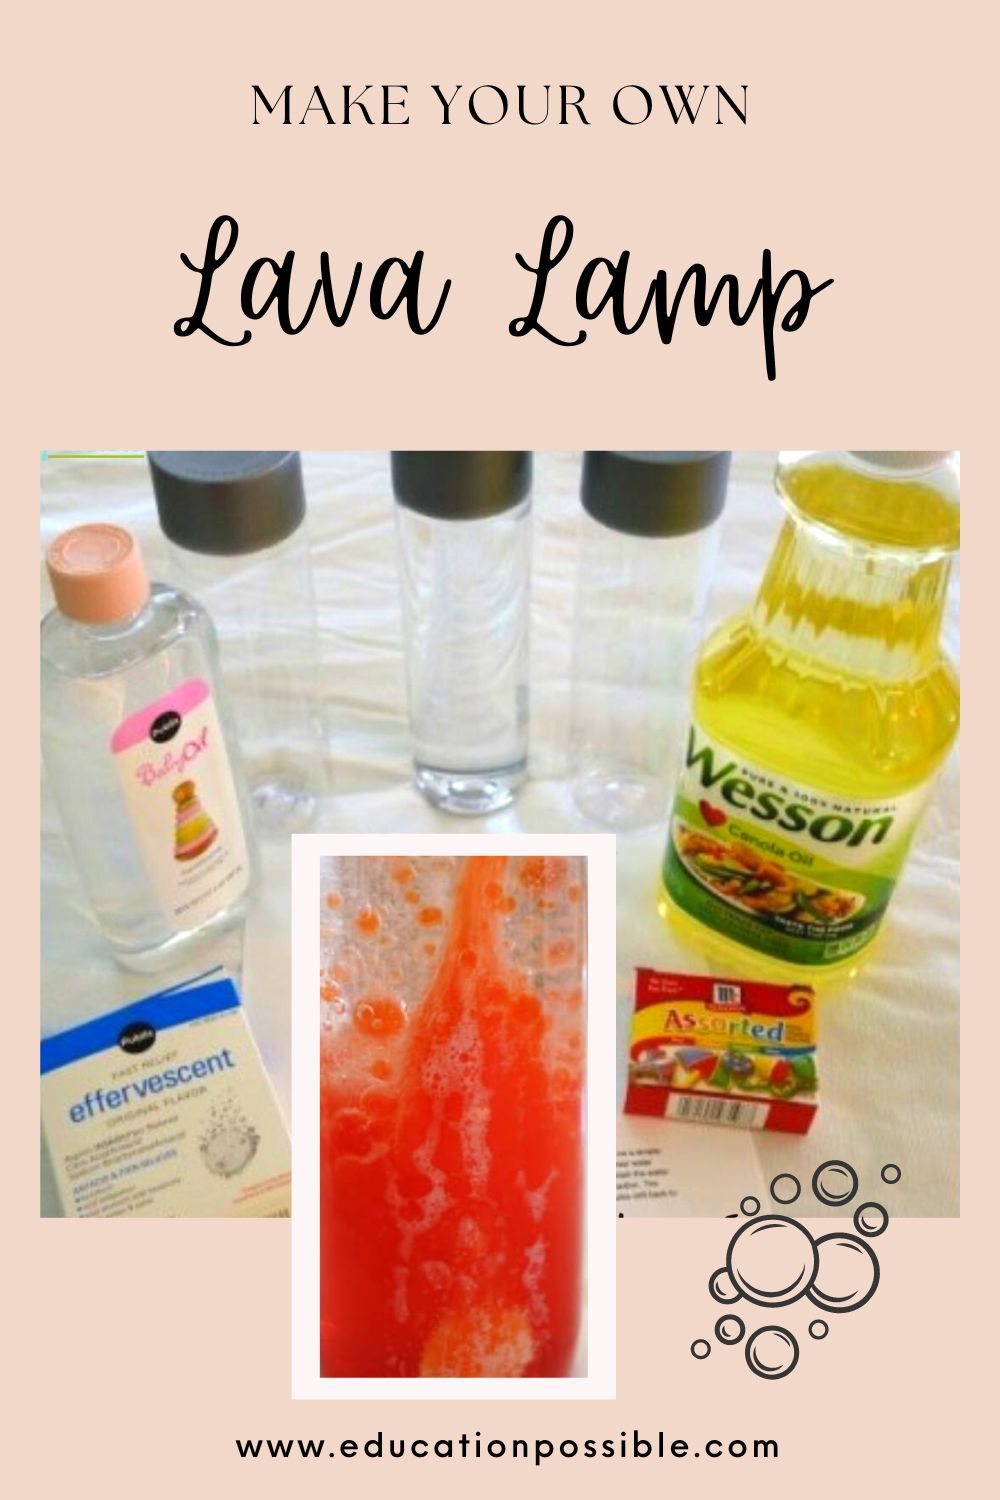 Household supplies used to make a lava lamp - empty bottles, vegetable and baby oil, effervescent tablets, and food coloring.